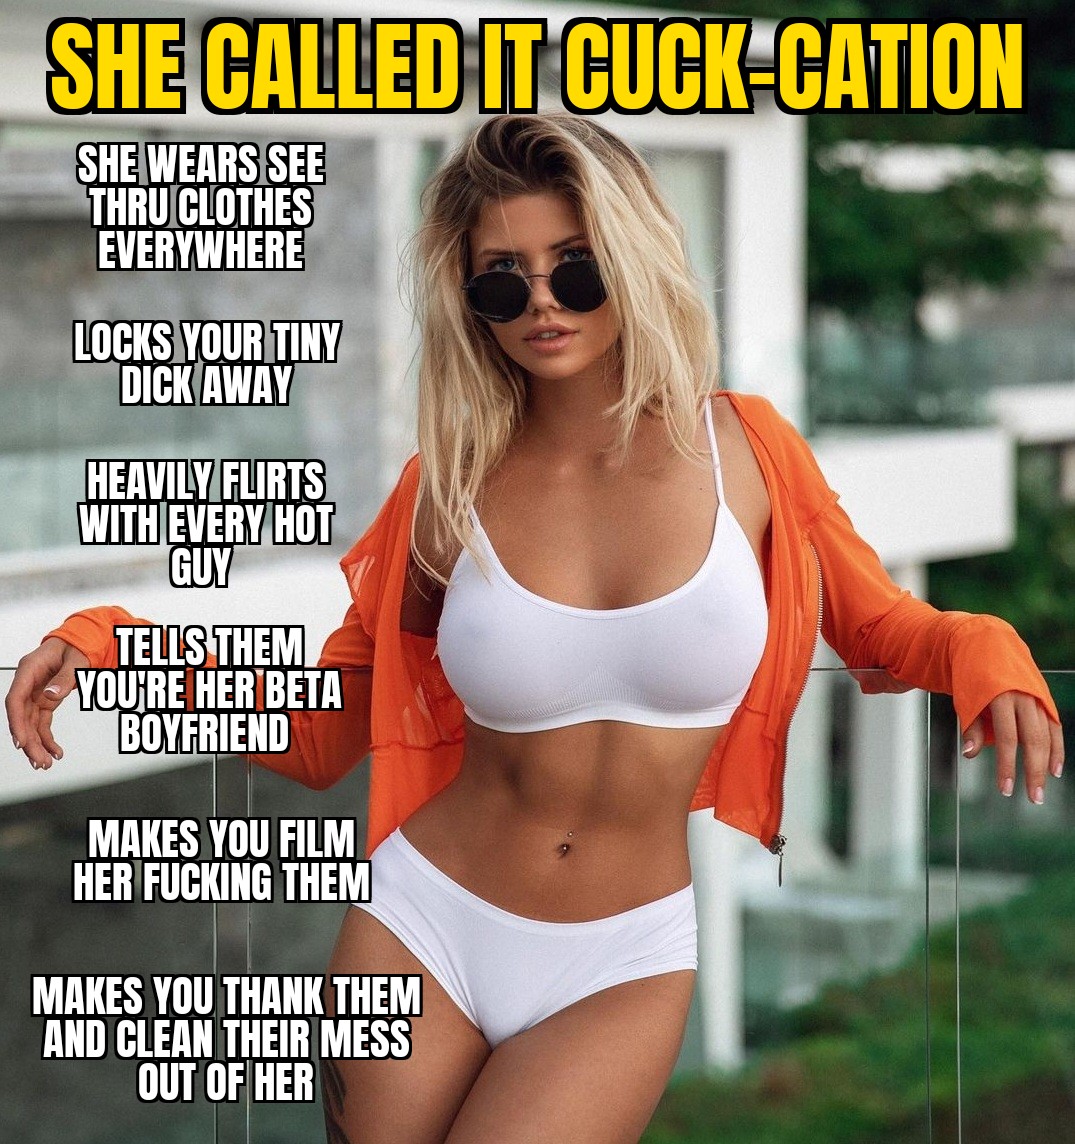 Hope youre ready for cuck-cation